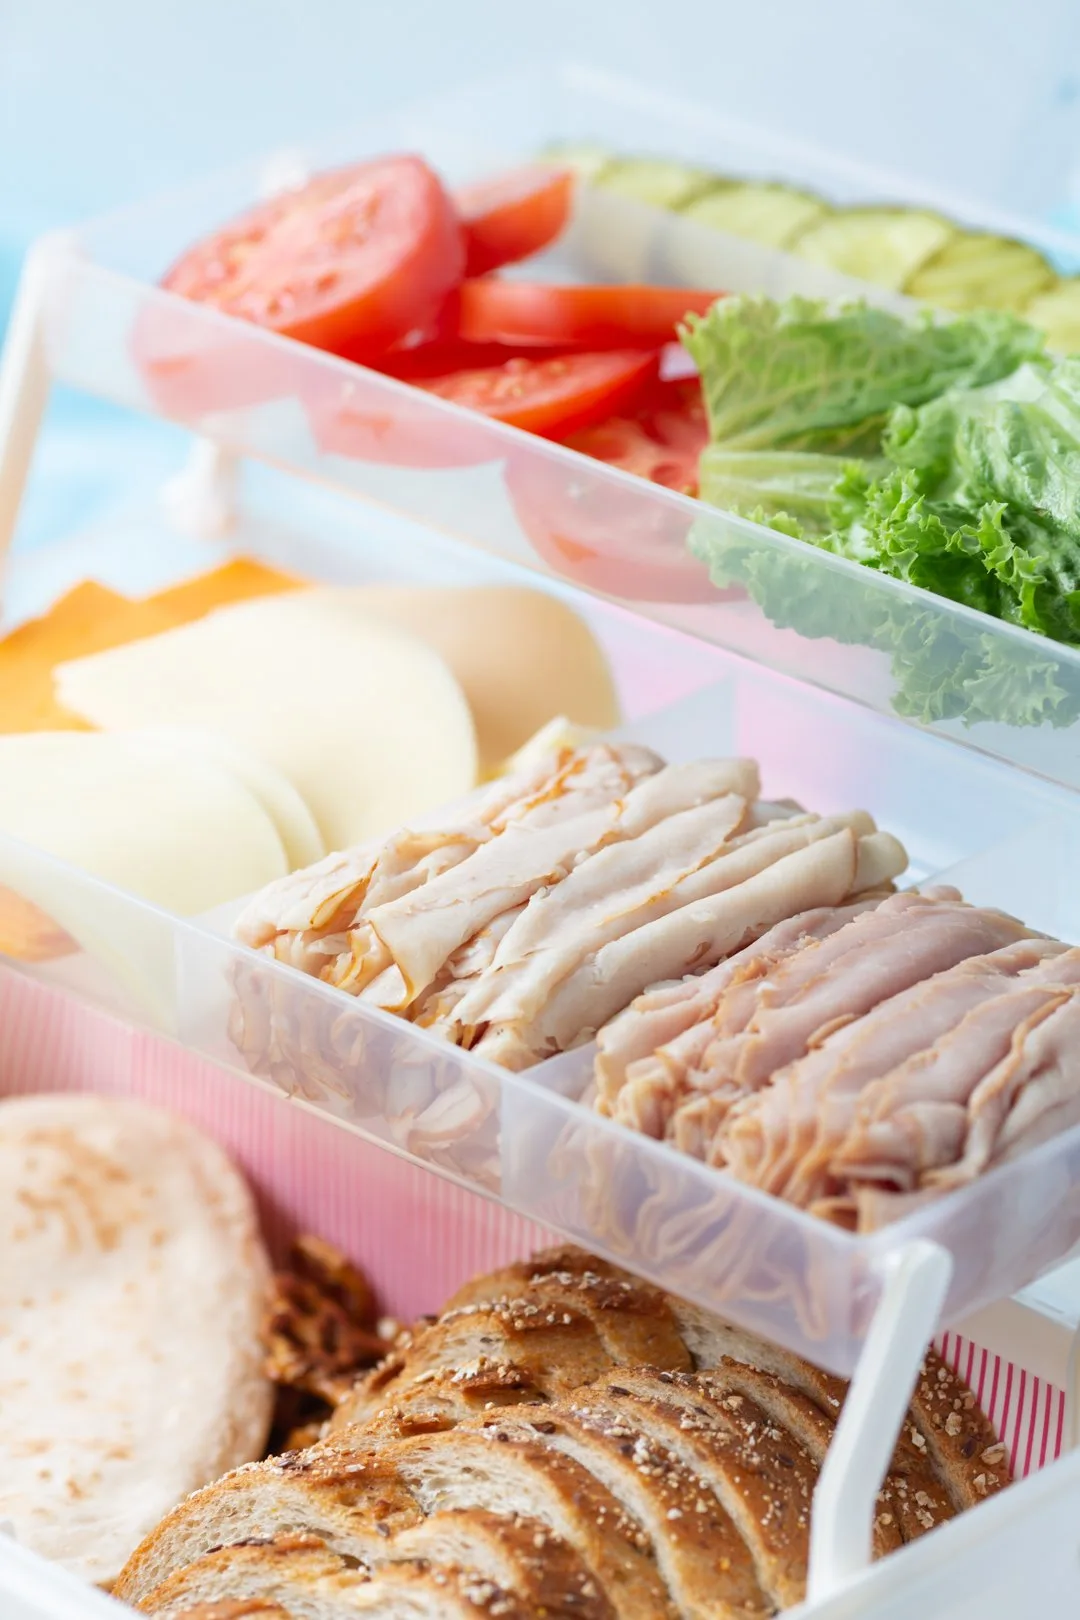 tackle box loaded with traditional sandwich fixings and toppings